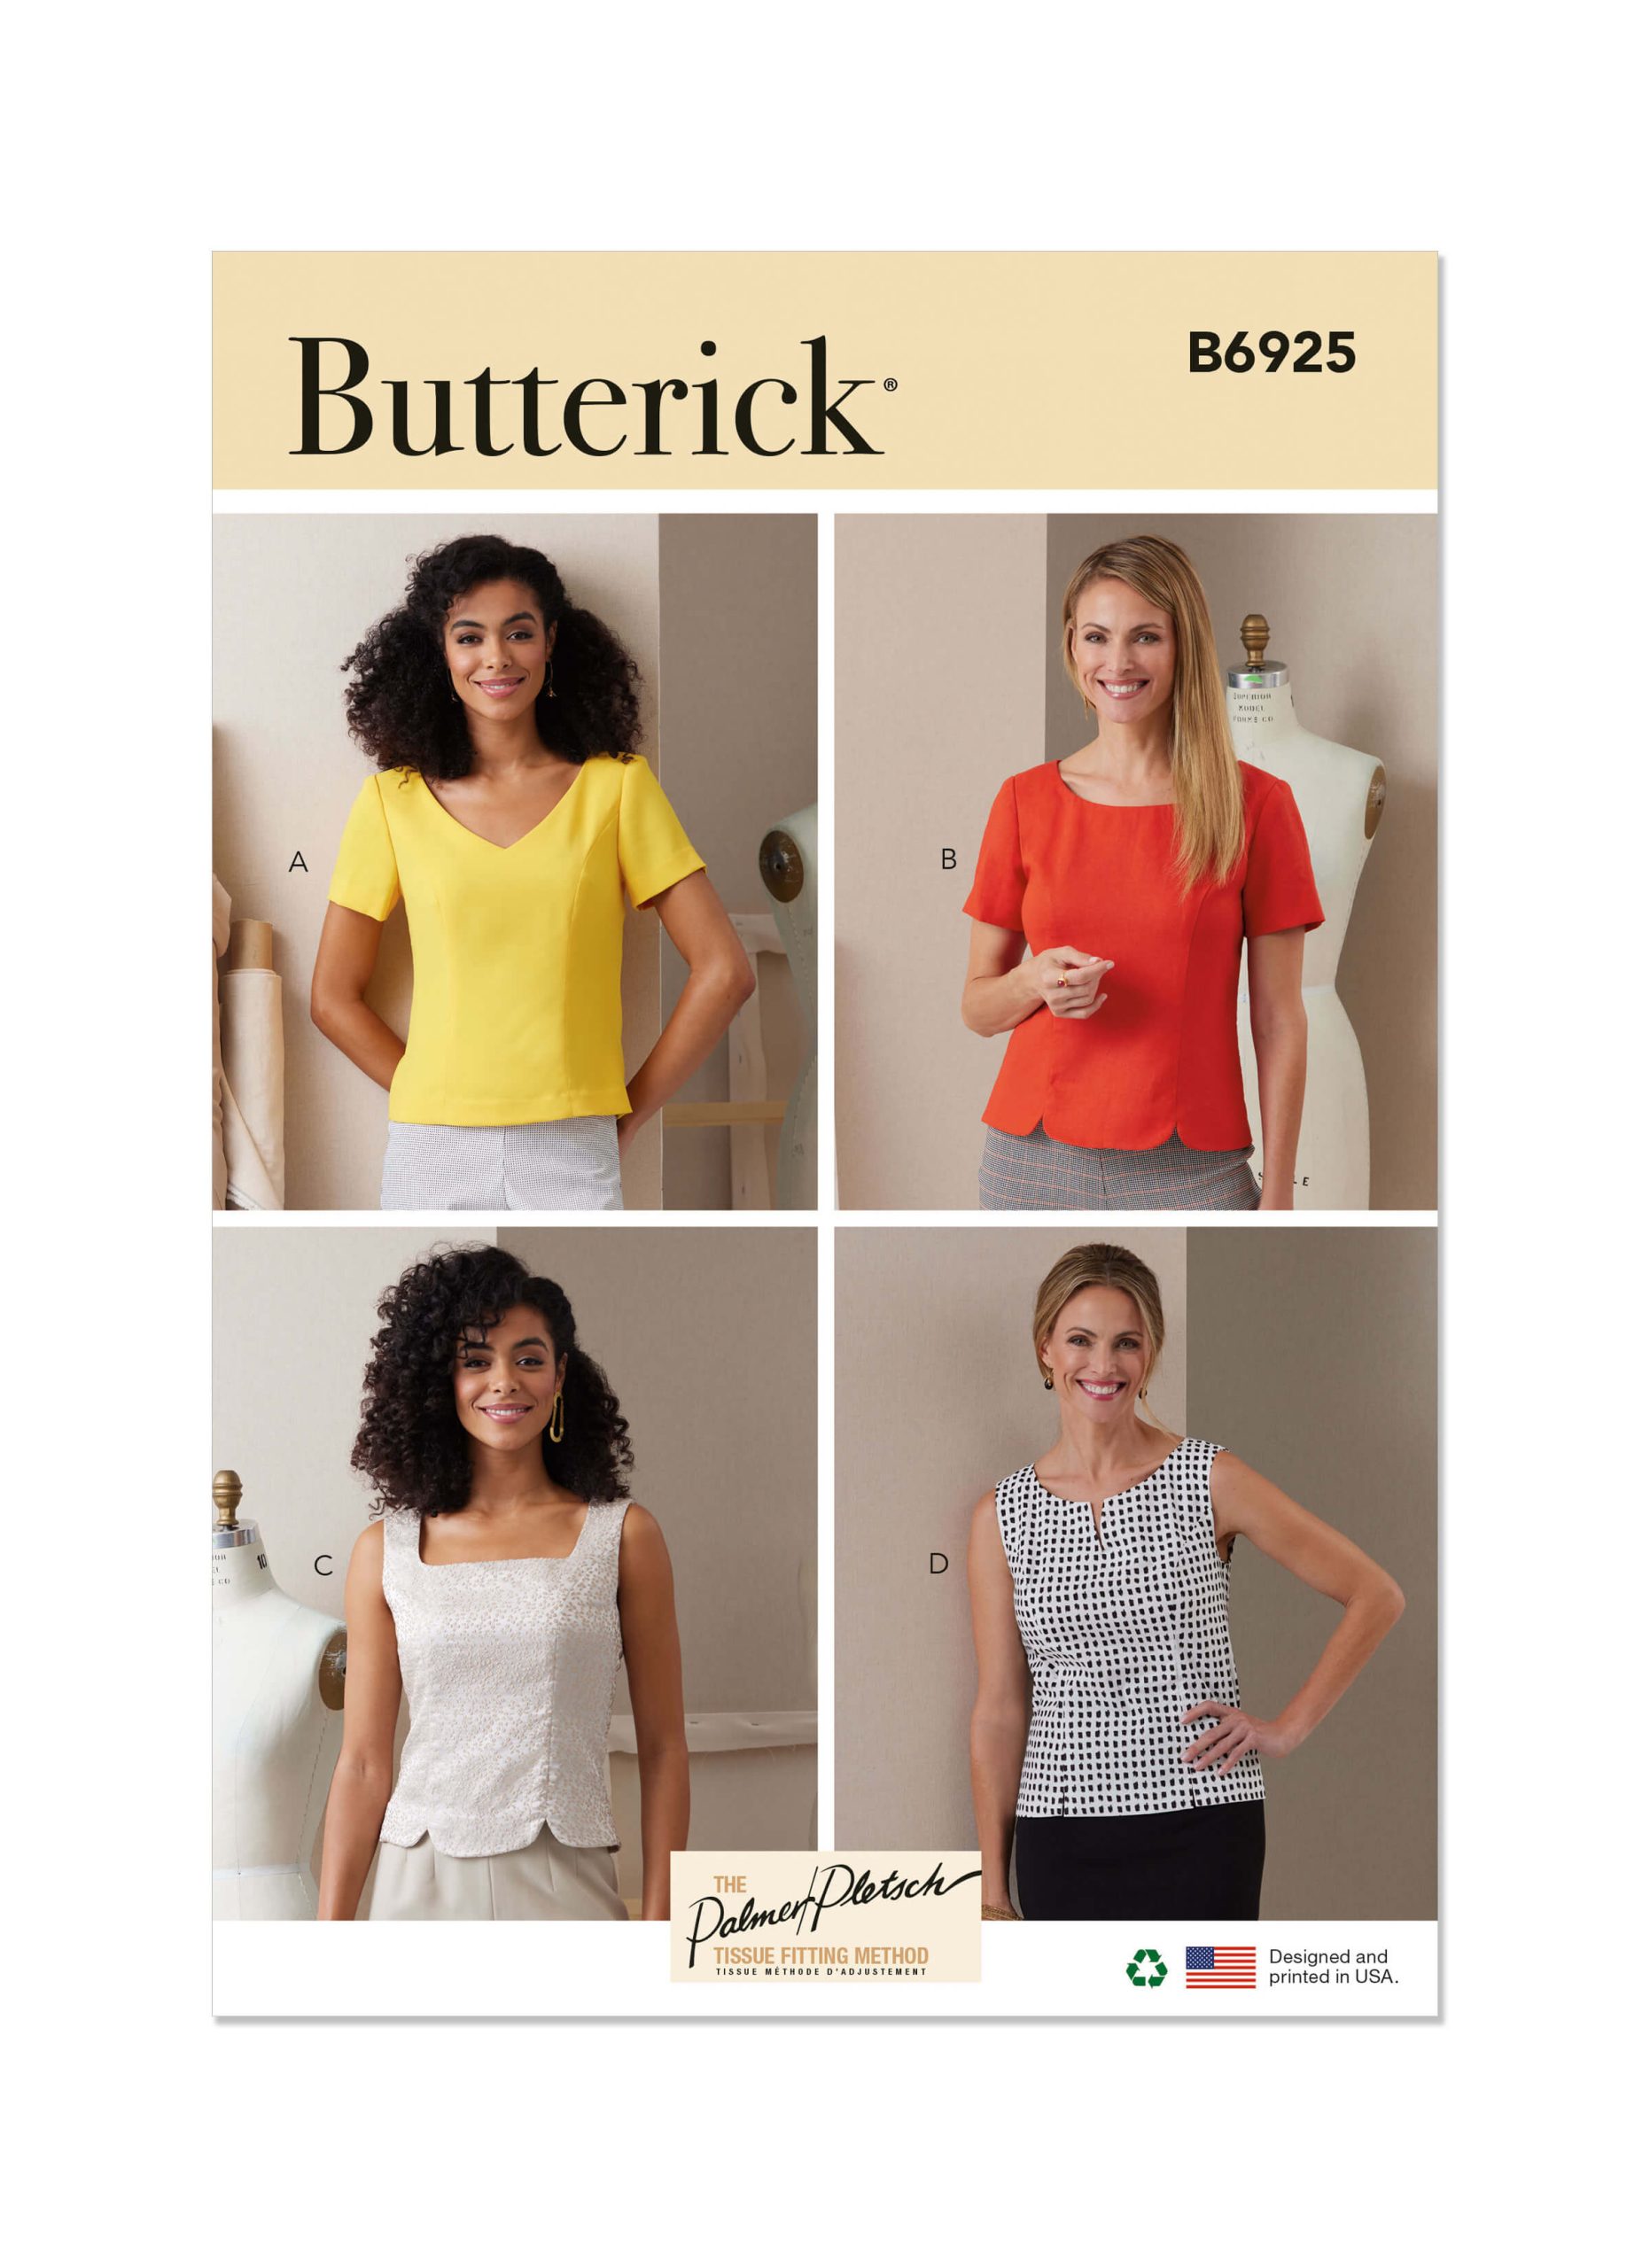 Butterick Sewing Pattern B6925 Misses' Tops By Palmer/Pletsch